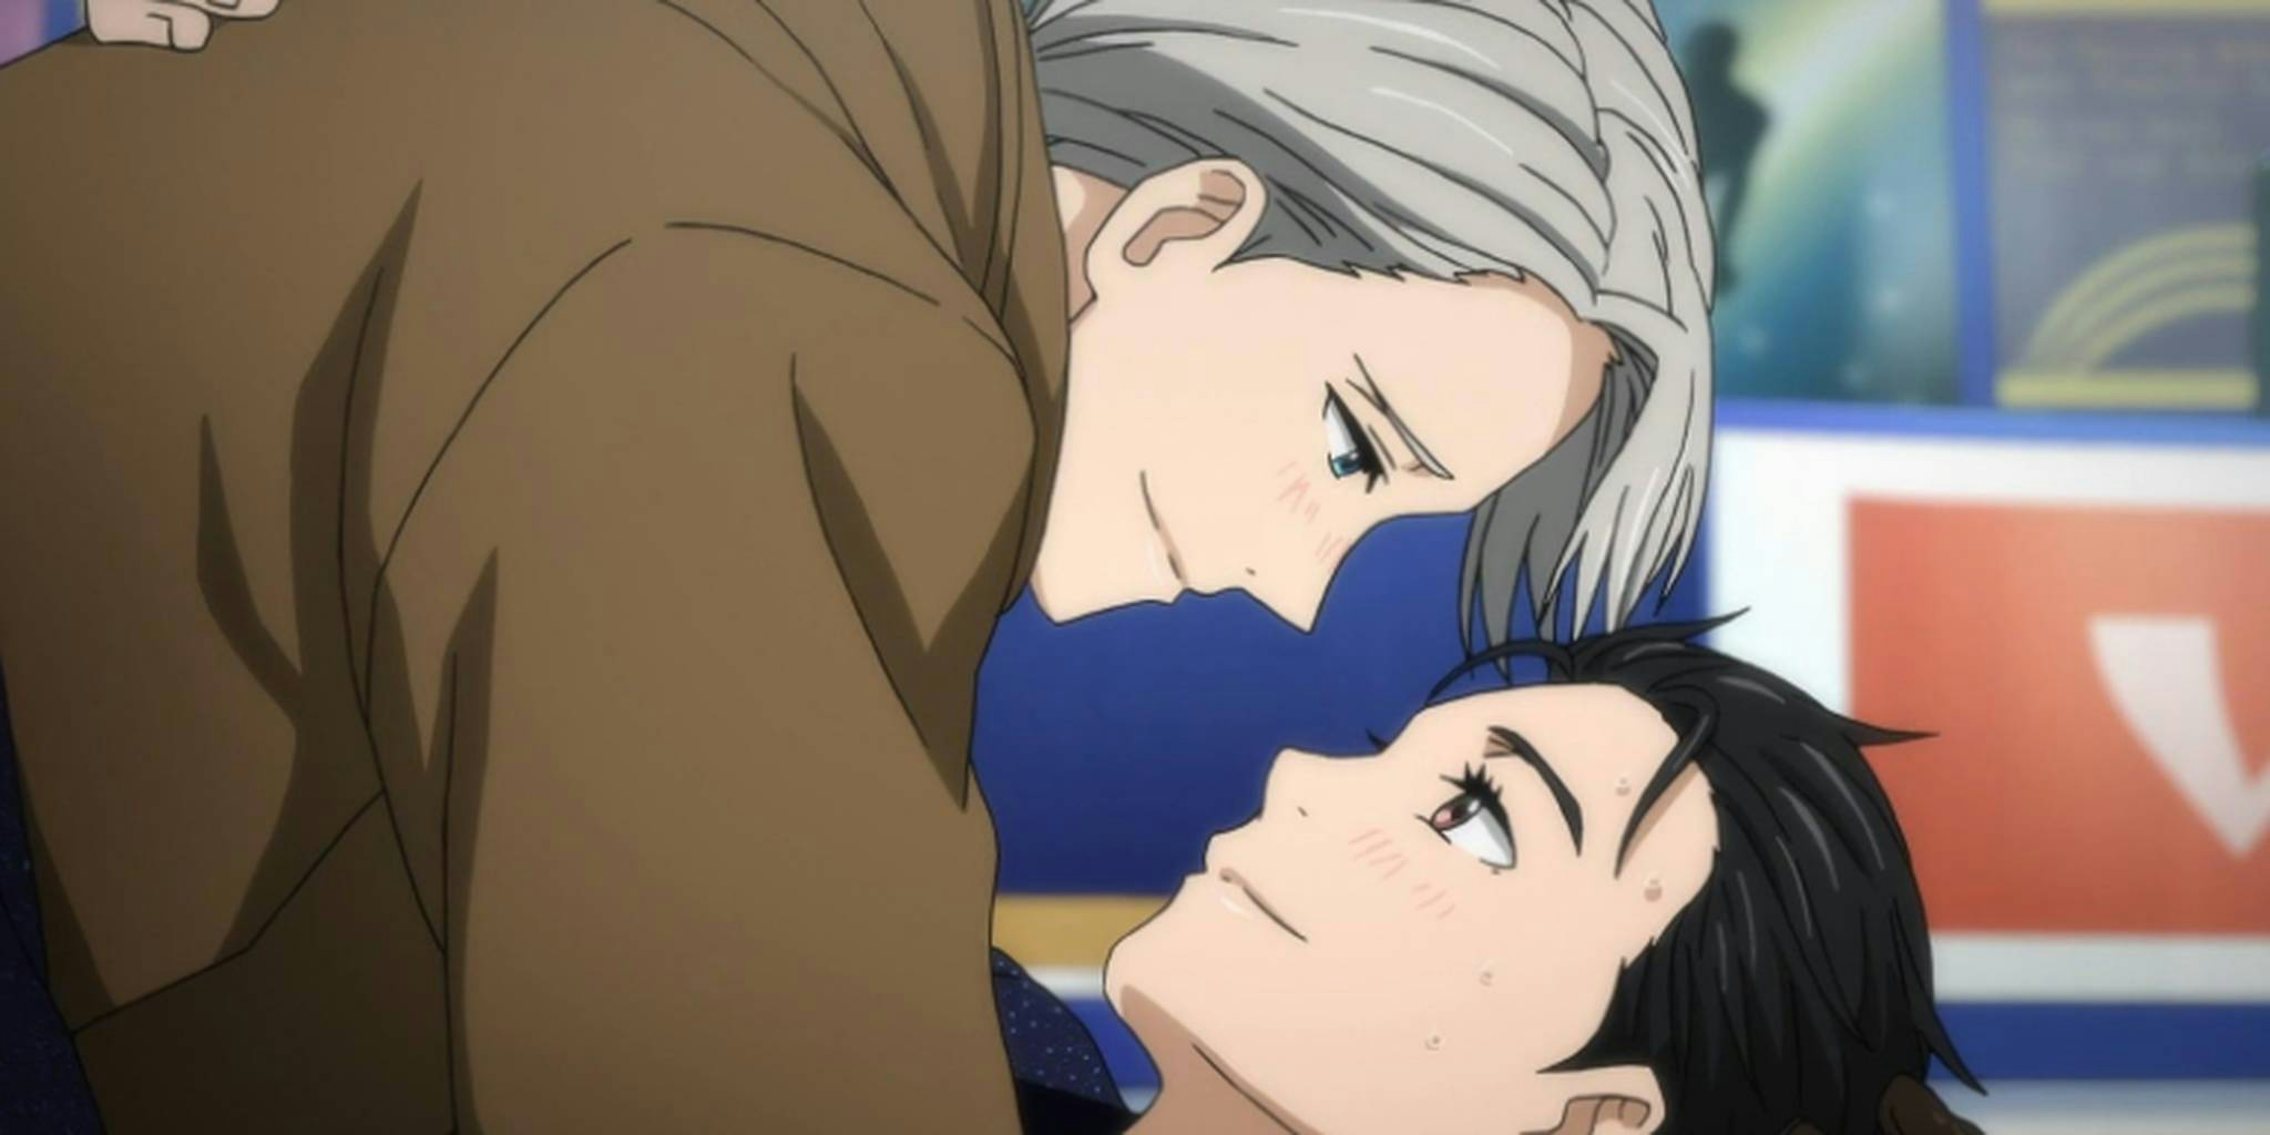 10 anime to watch if you loved 'Yuri on Ice' - The Daily Dot